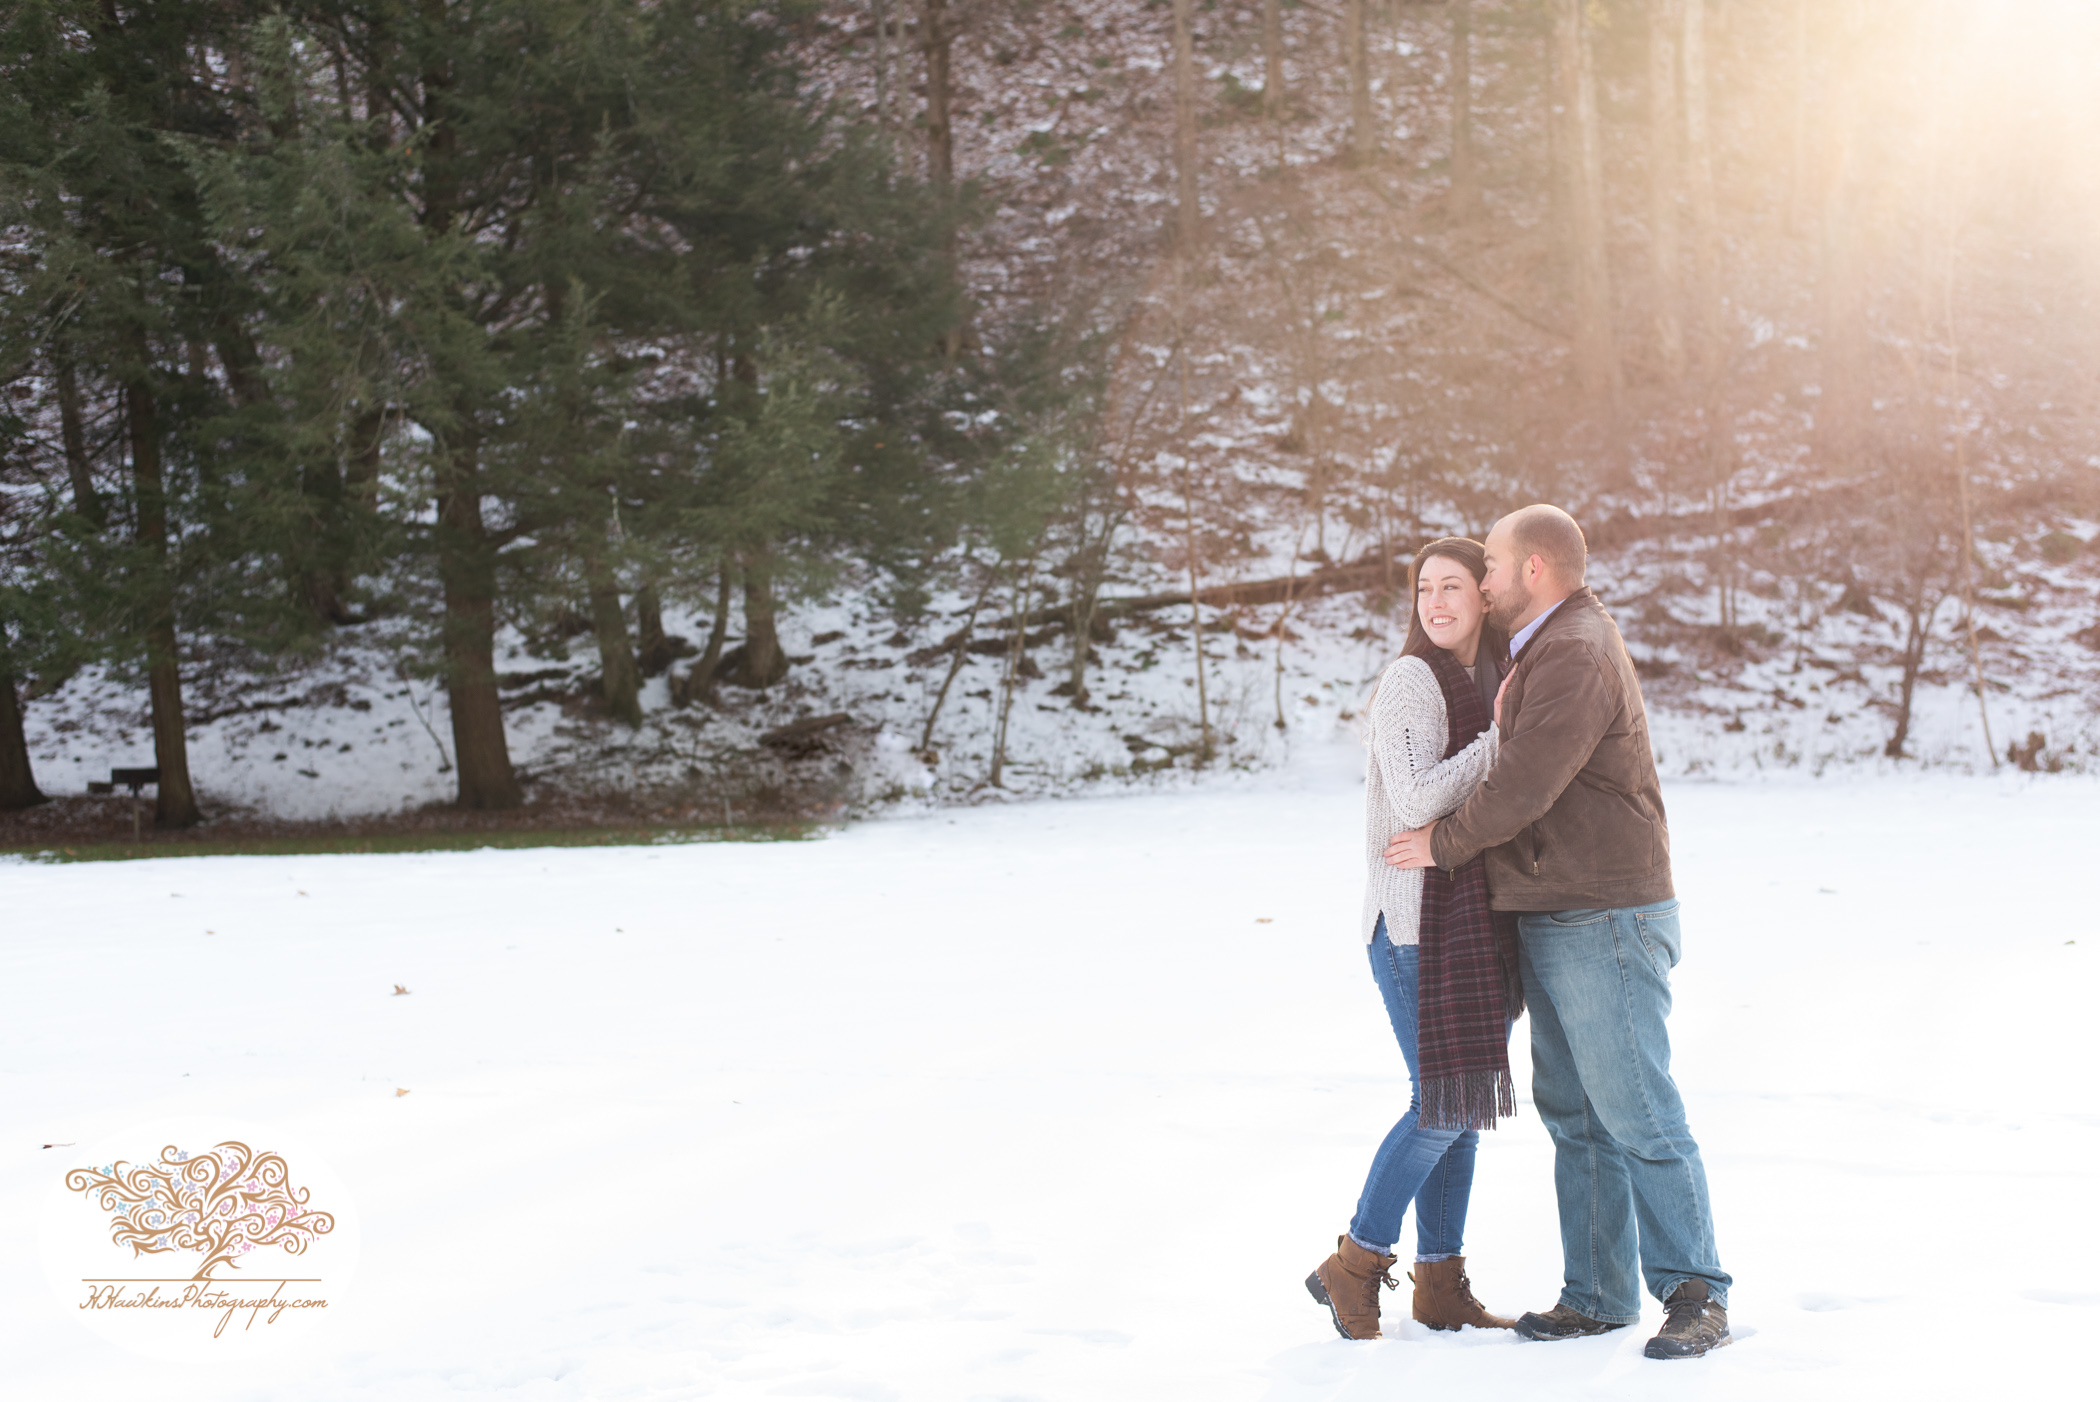 Epic snowy engagement picture of couple in the snow with sun peeking through the lens